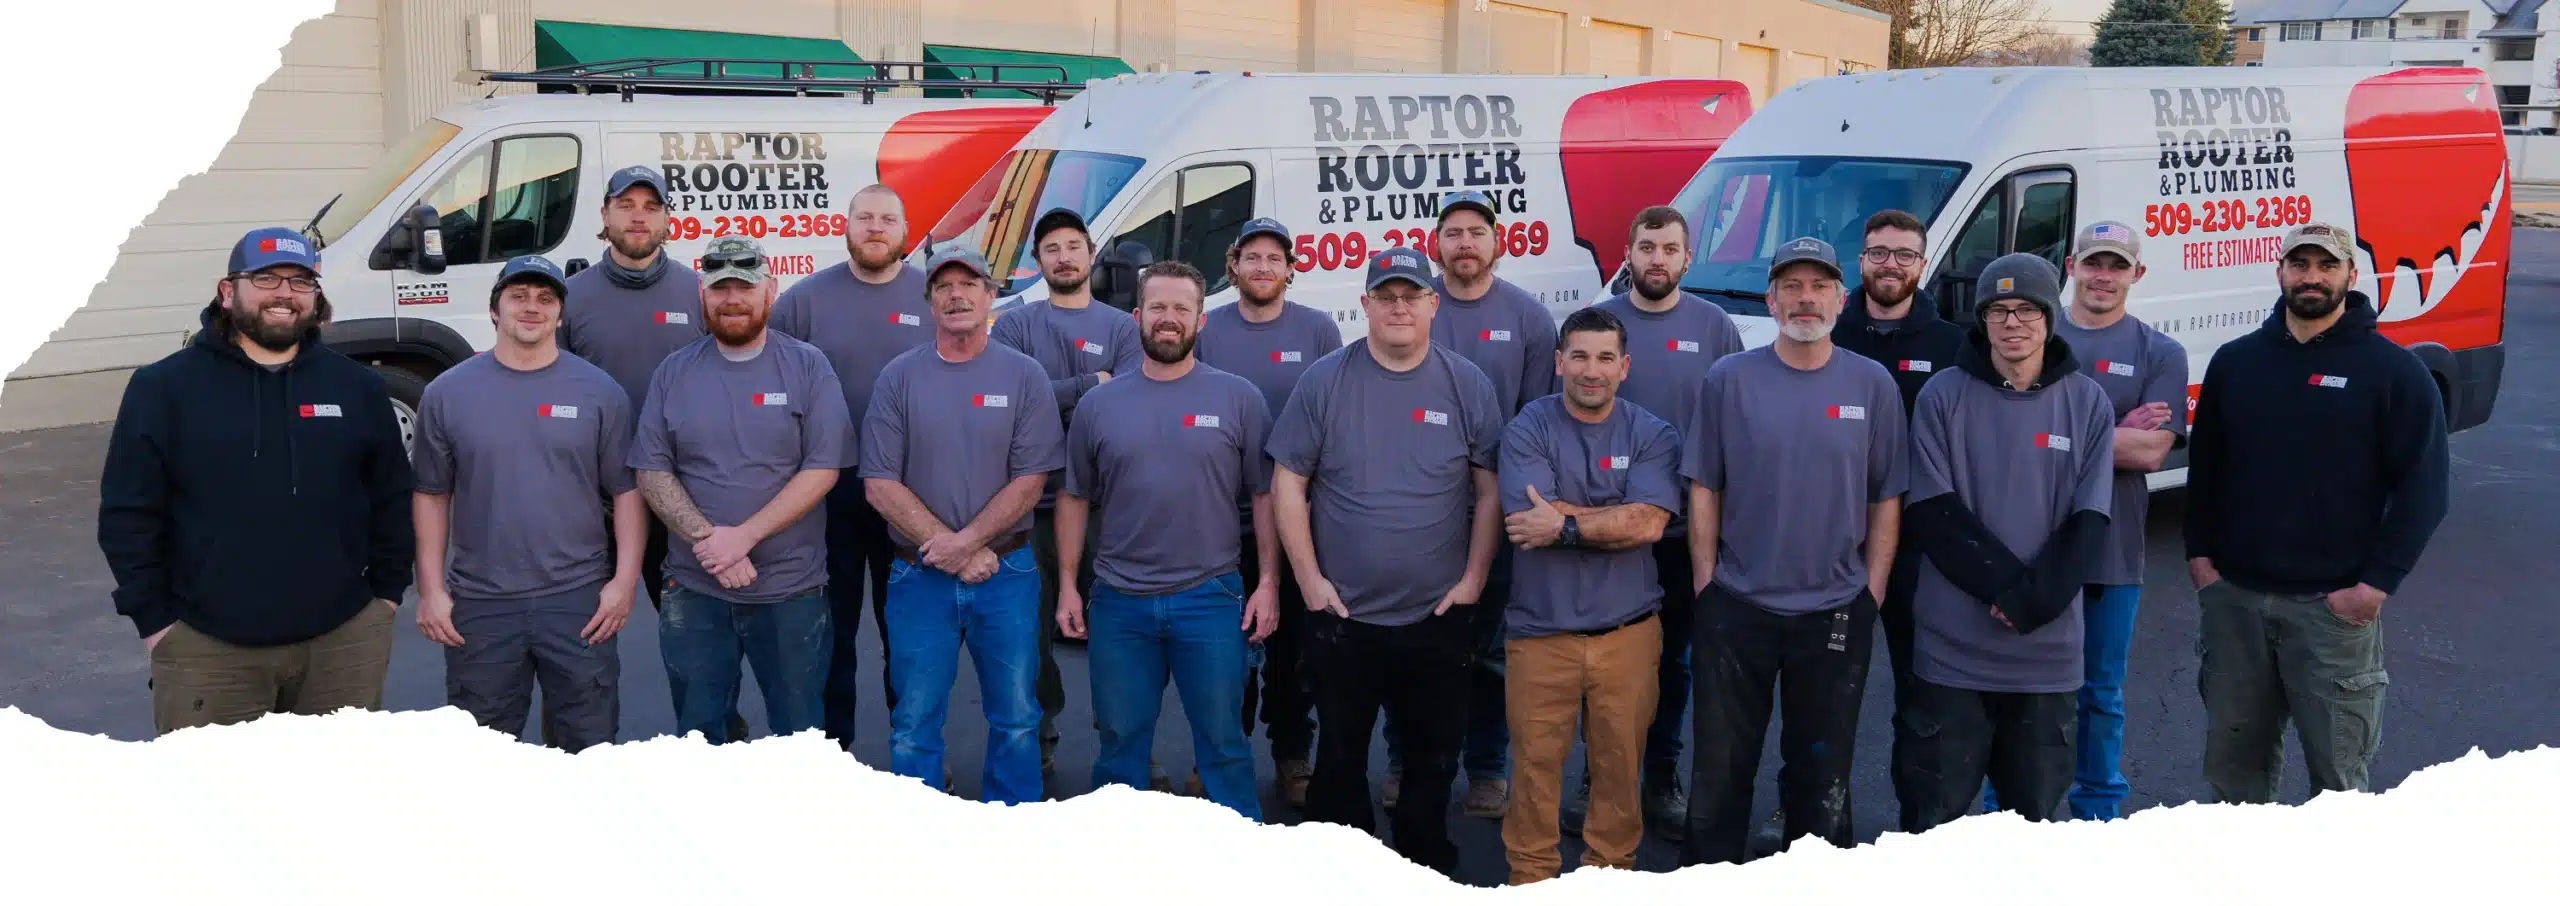 picture of Raptor Rooter & Plumbing team in front of company vehicles